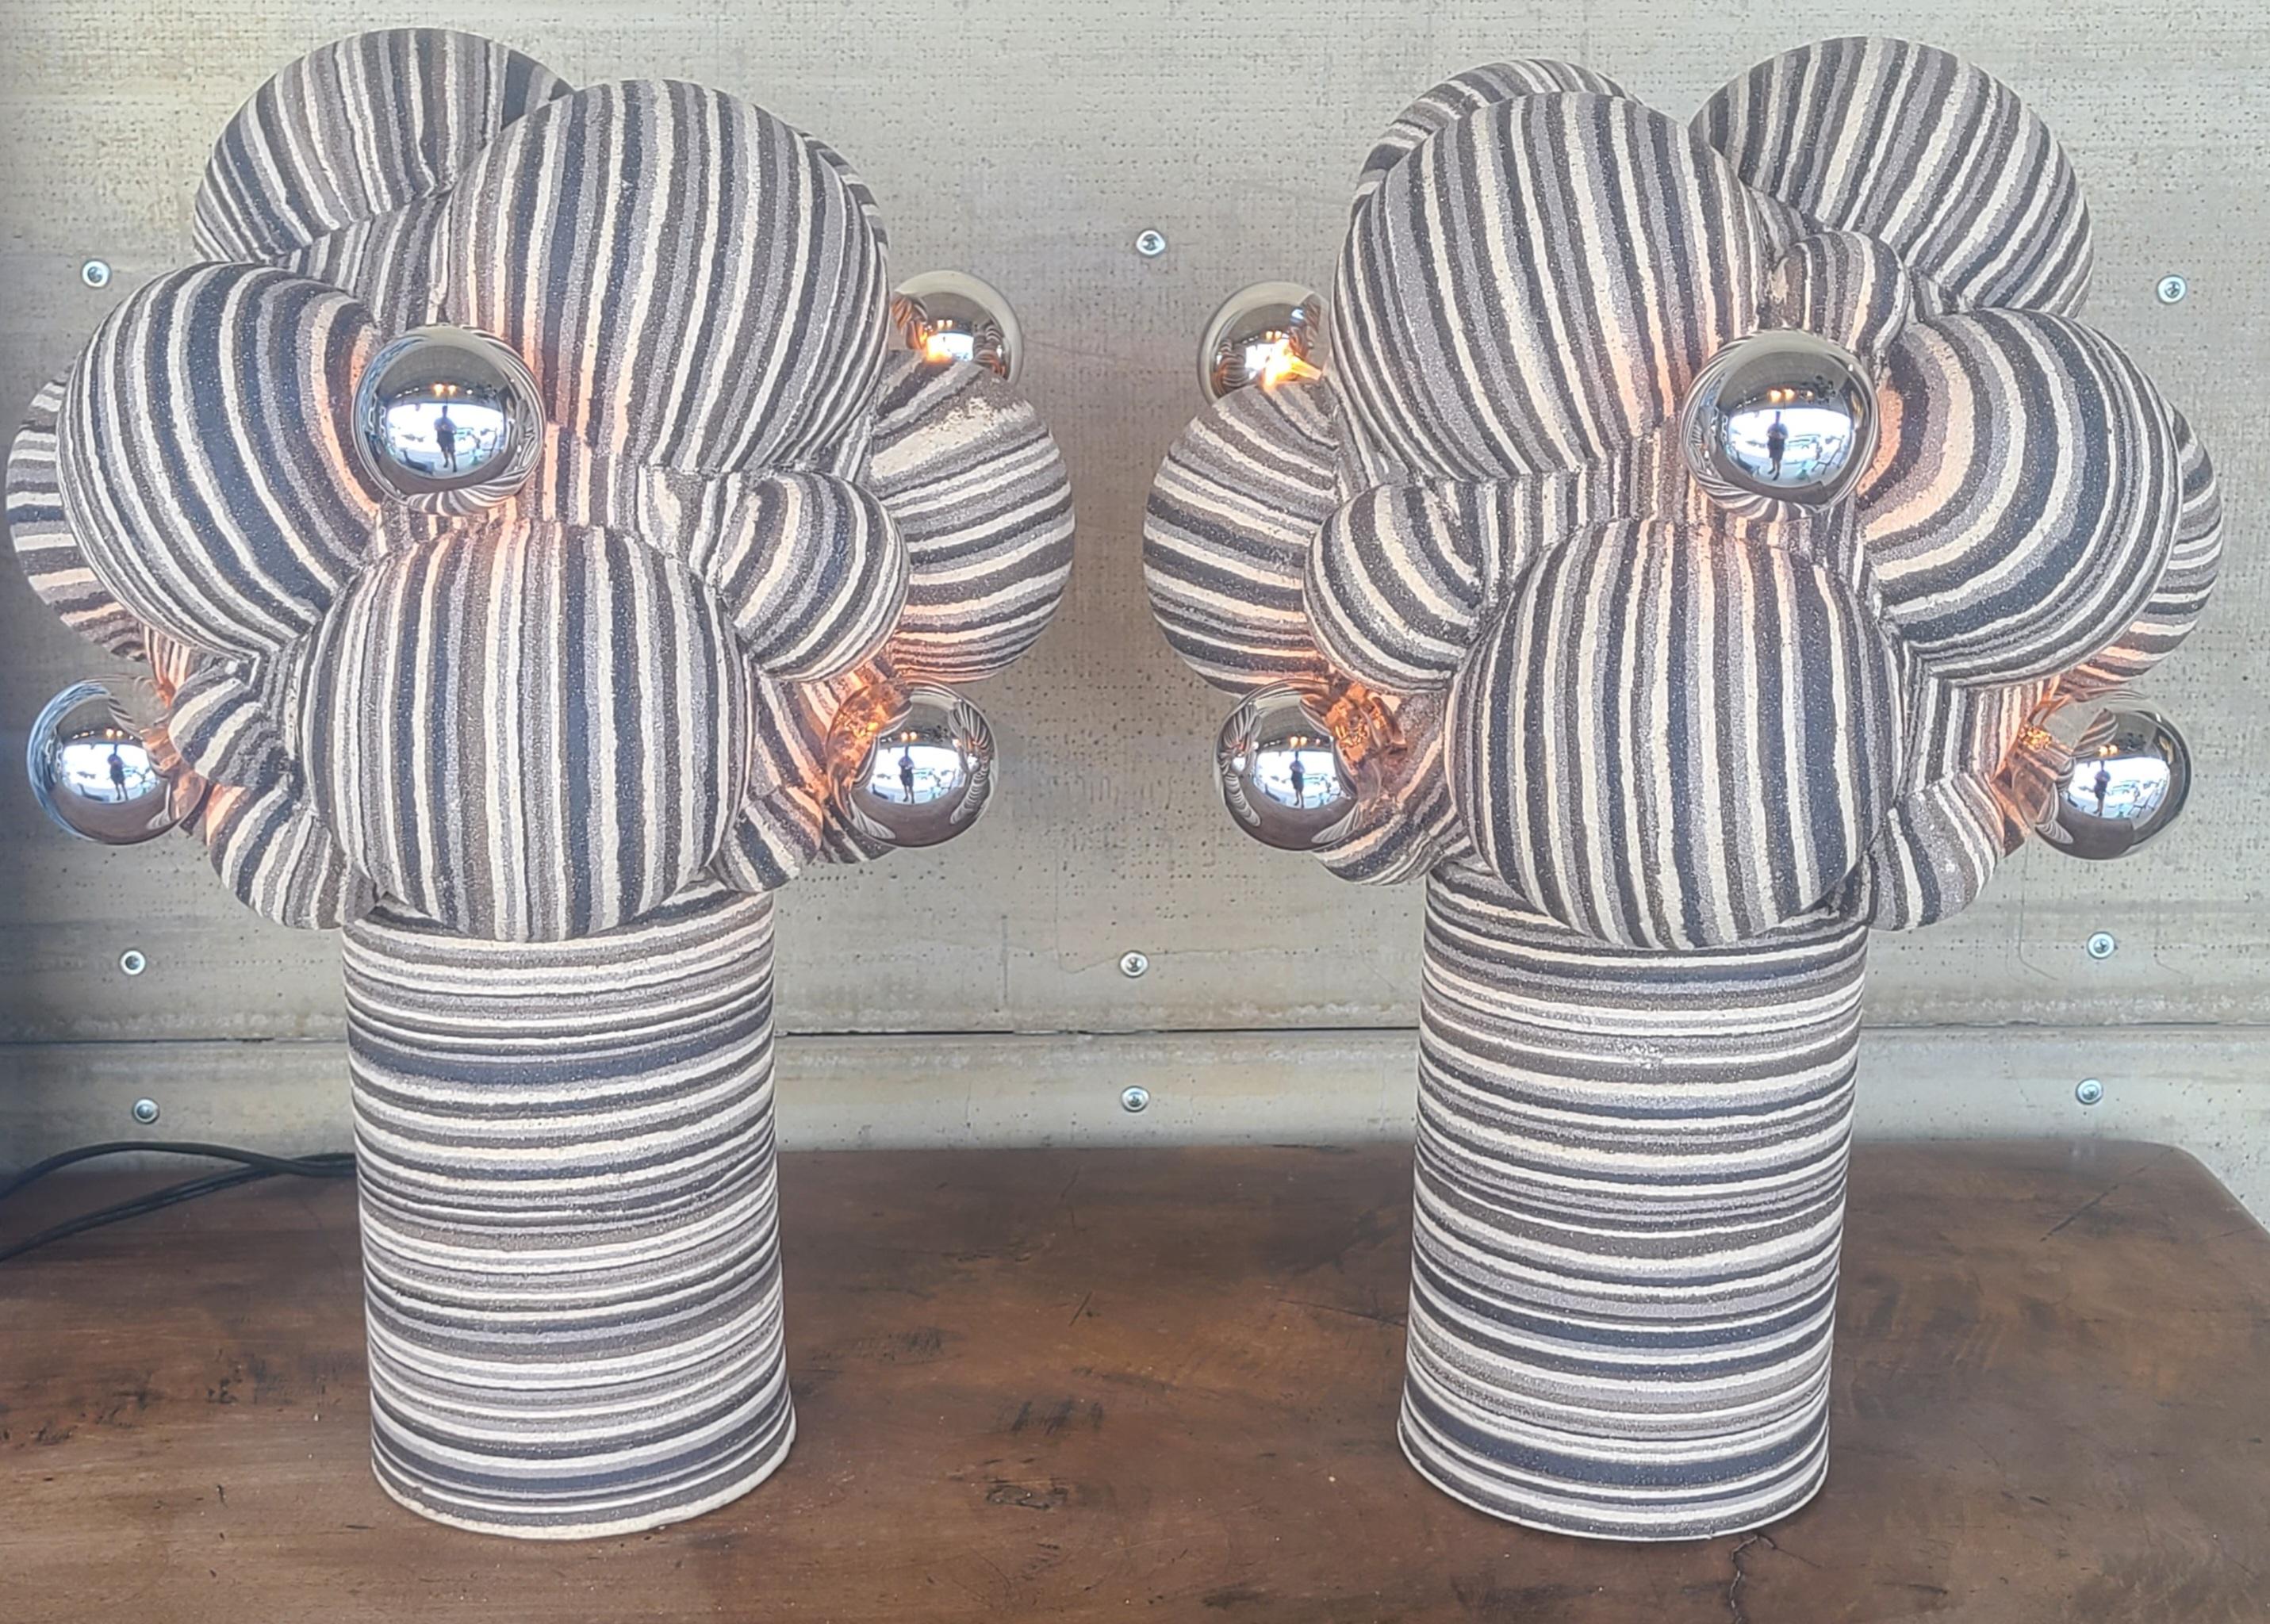 Contemporary Pair of Studio Pottery Spore Table Lamps by Lewis Trimble  For Sale